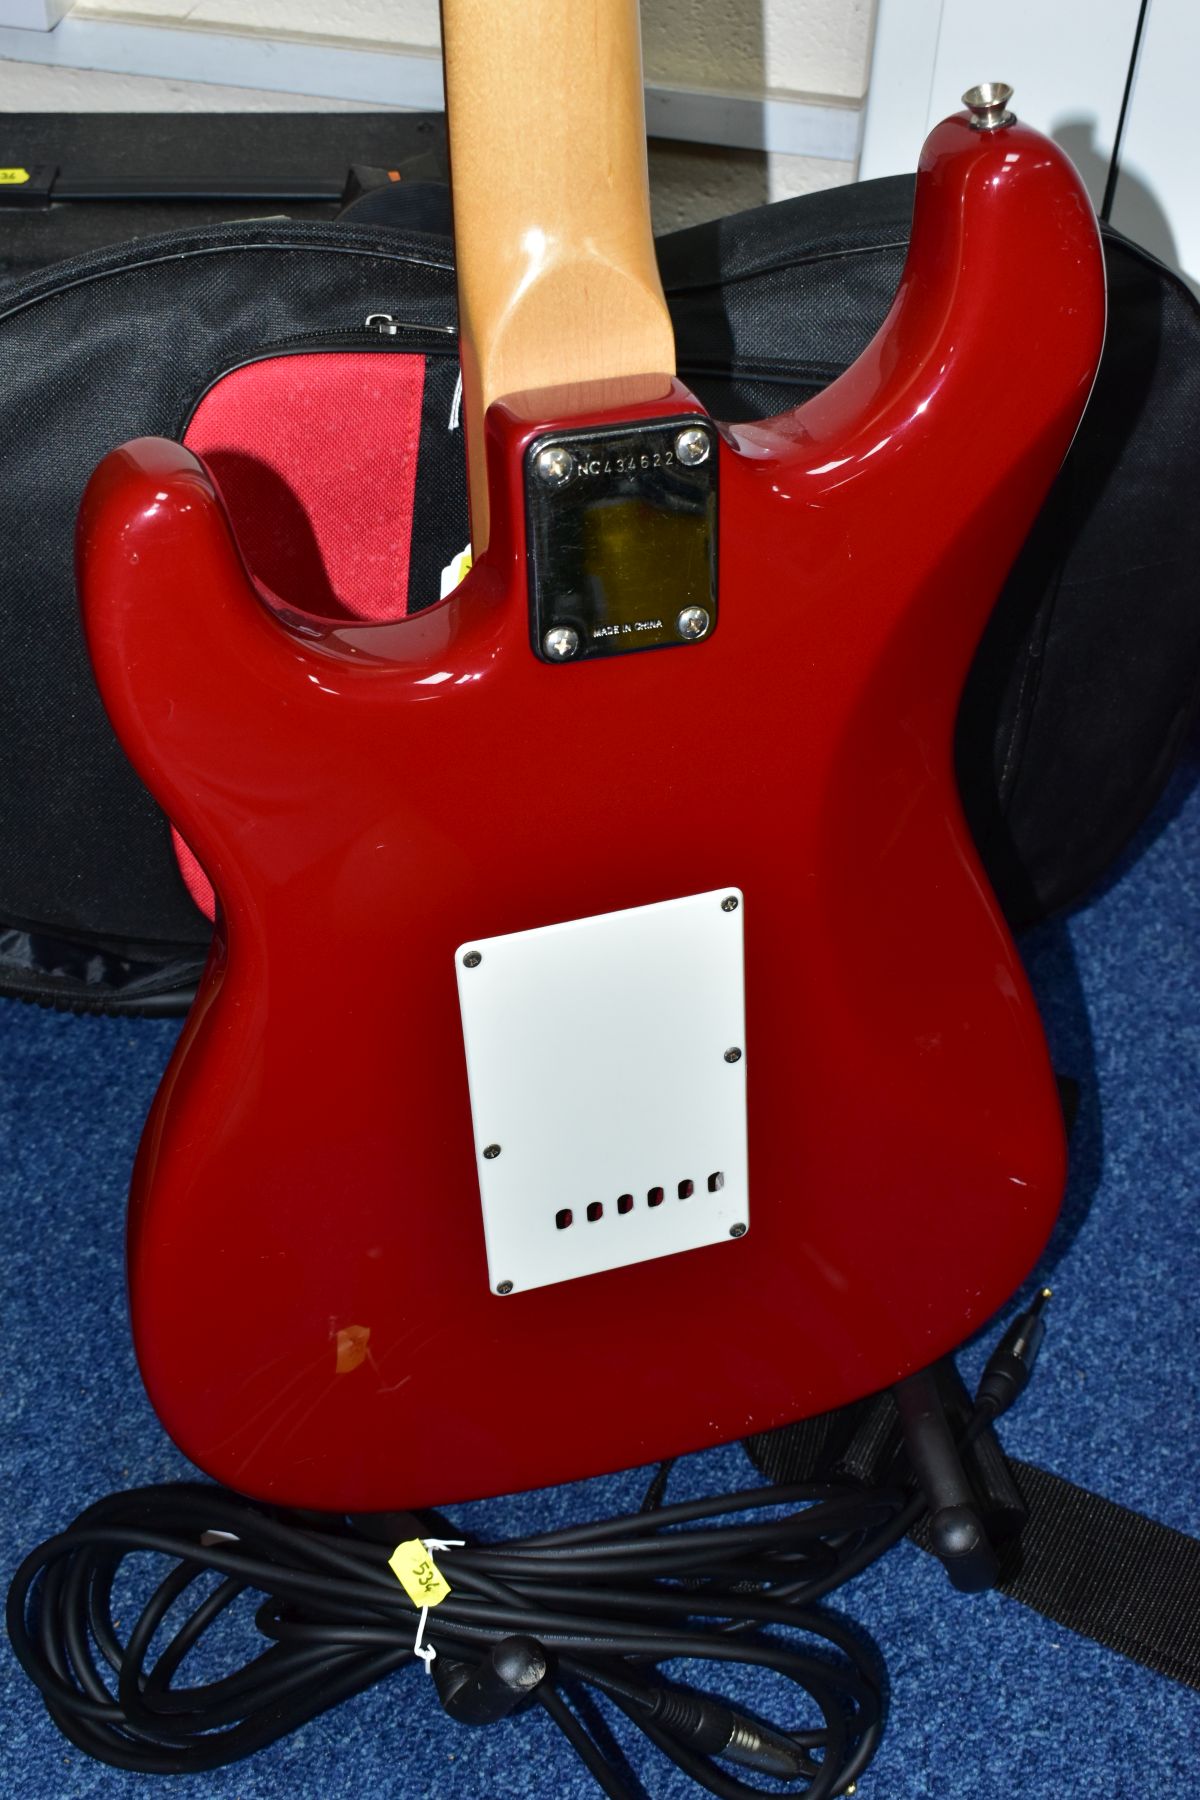 A SUNN MUSTANG ELECTRIC GUITAR, RED AND CREAM FINISH, serial number NC434622, made in China, - Image 4 of 8